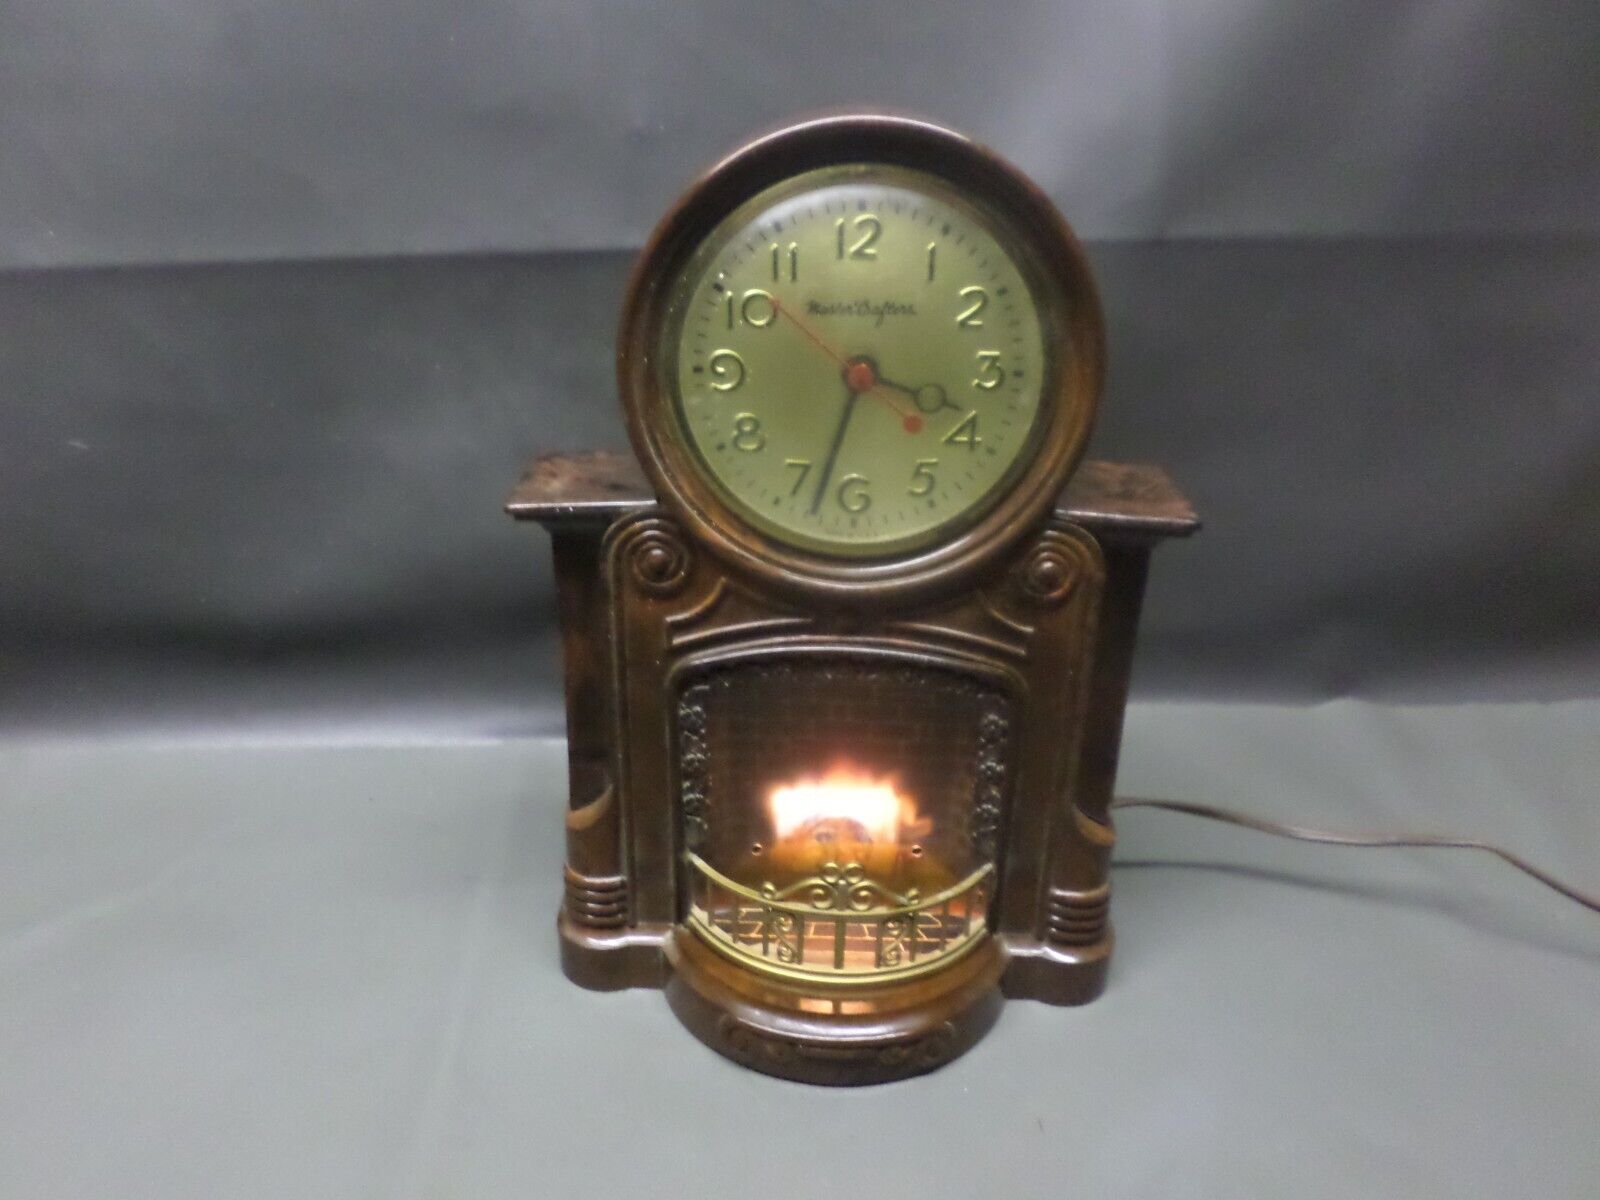 VINTAGE MASTERCRAFTERS FIREPLACE CLOCK - NO. 272 - LIGHTS UP  -  AS FOUND